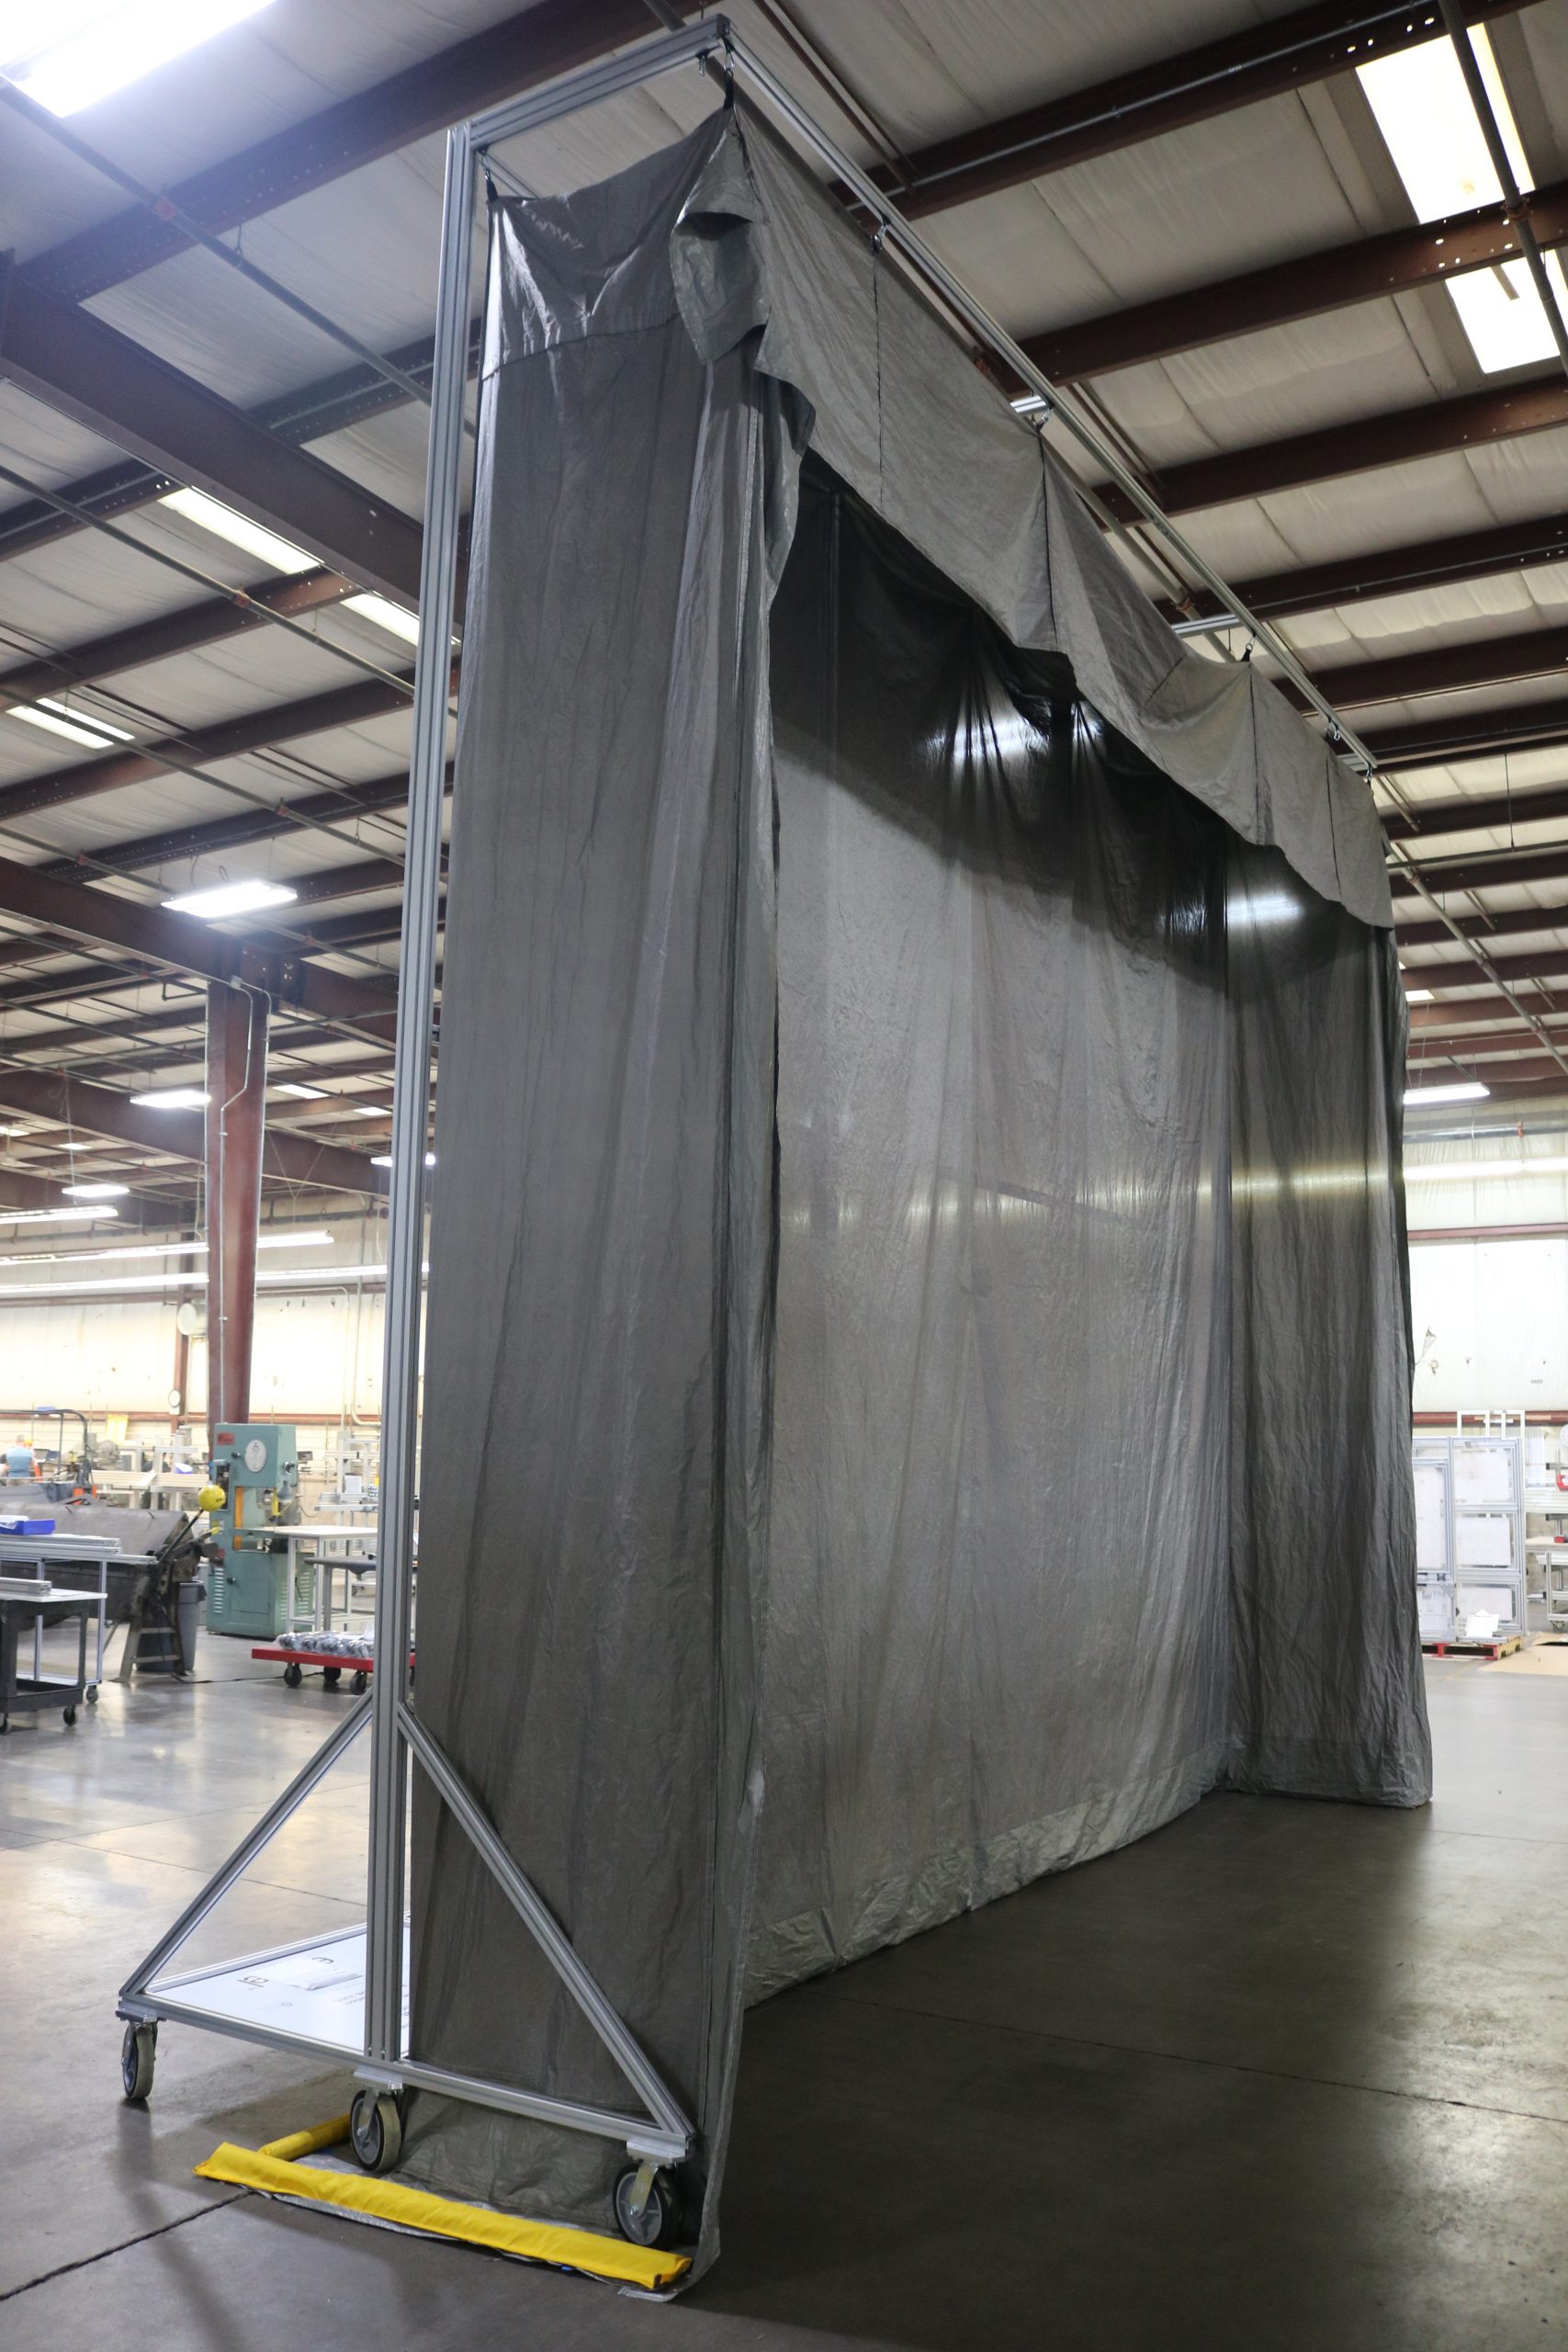 RF Shielding Curtains create Security and Isolation